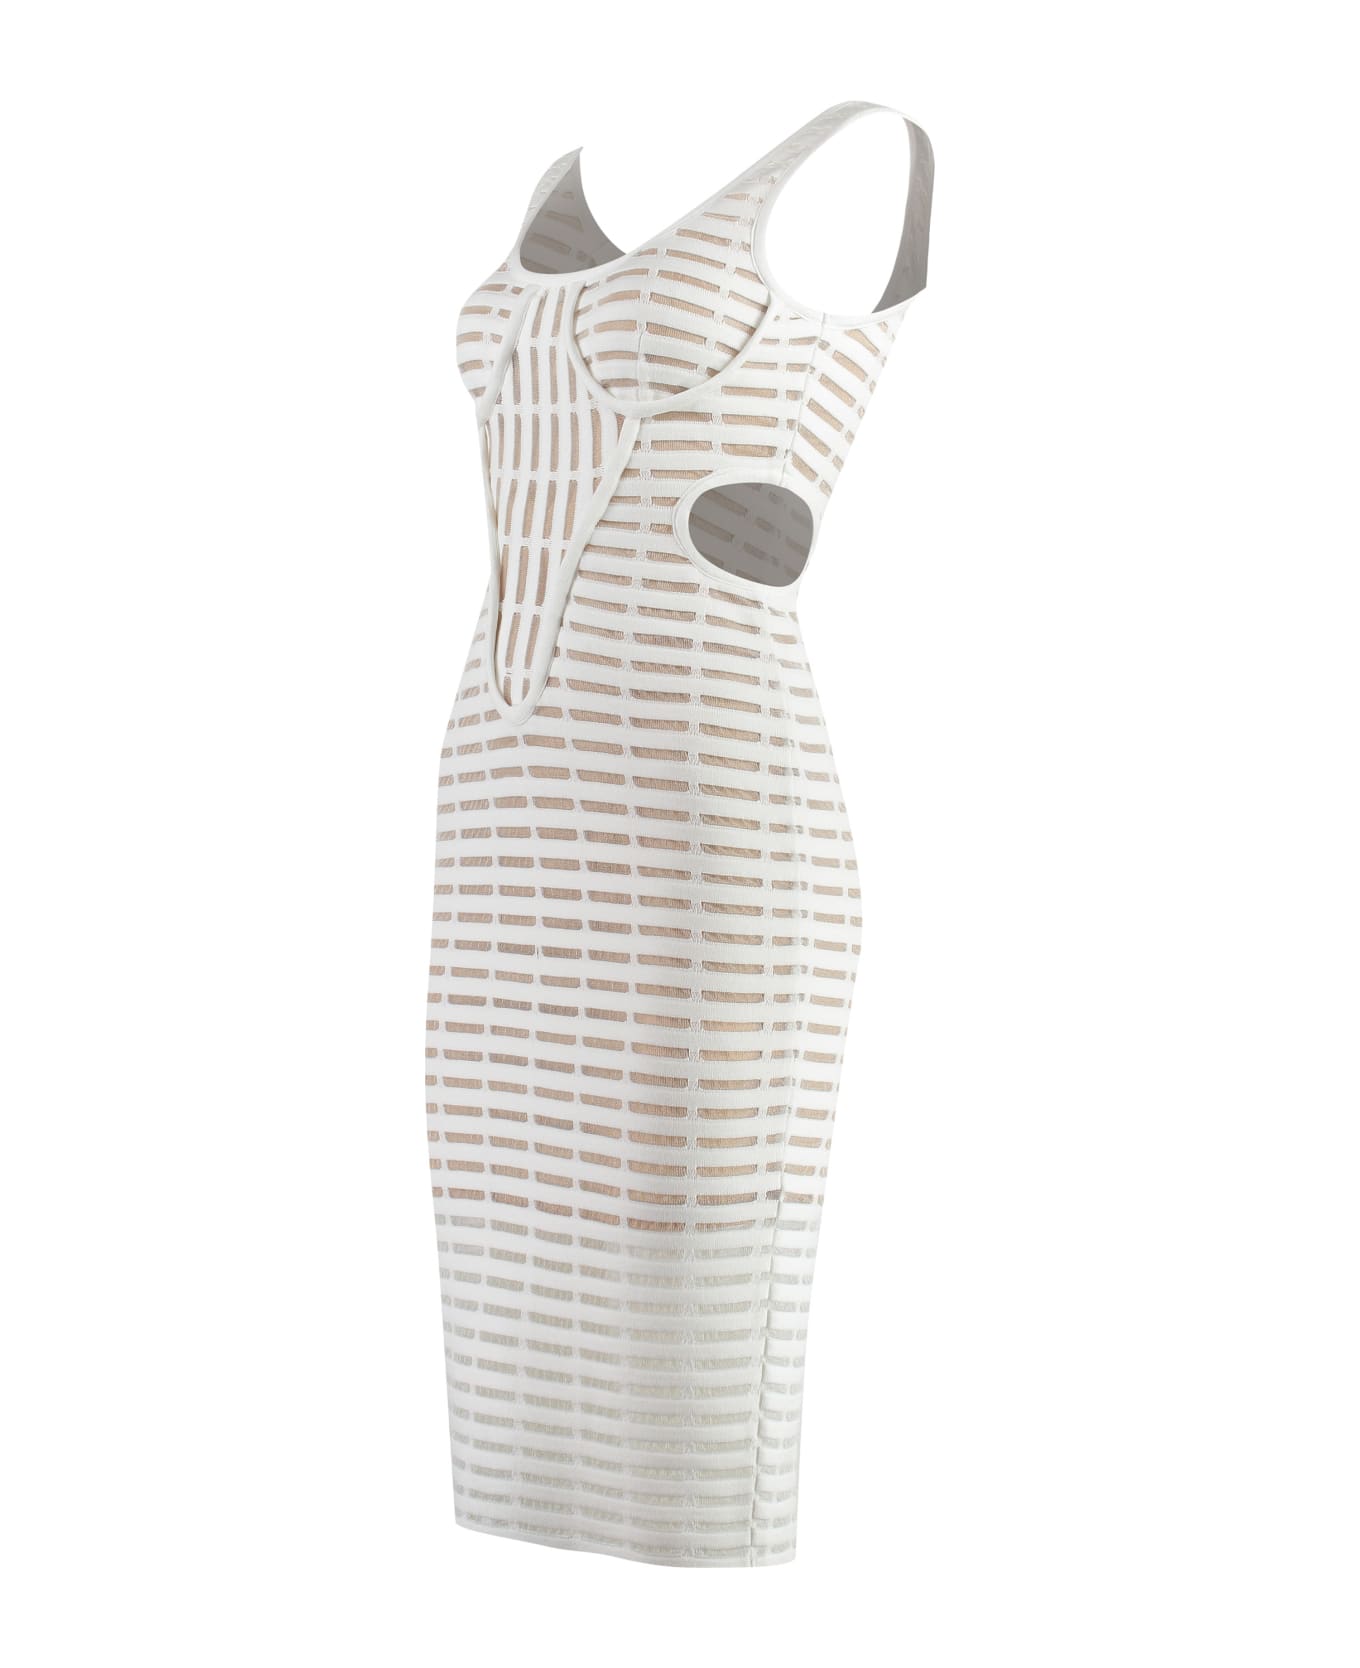 Genny Knitted Dress - White